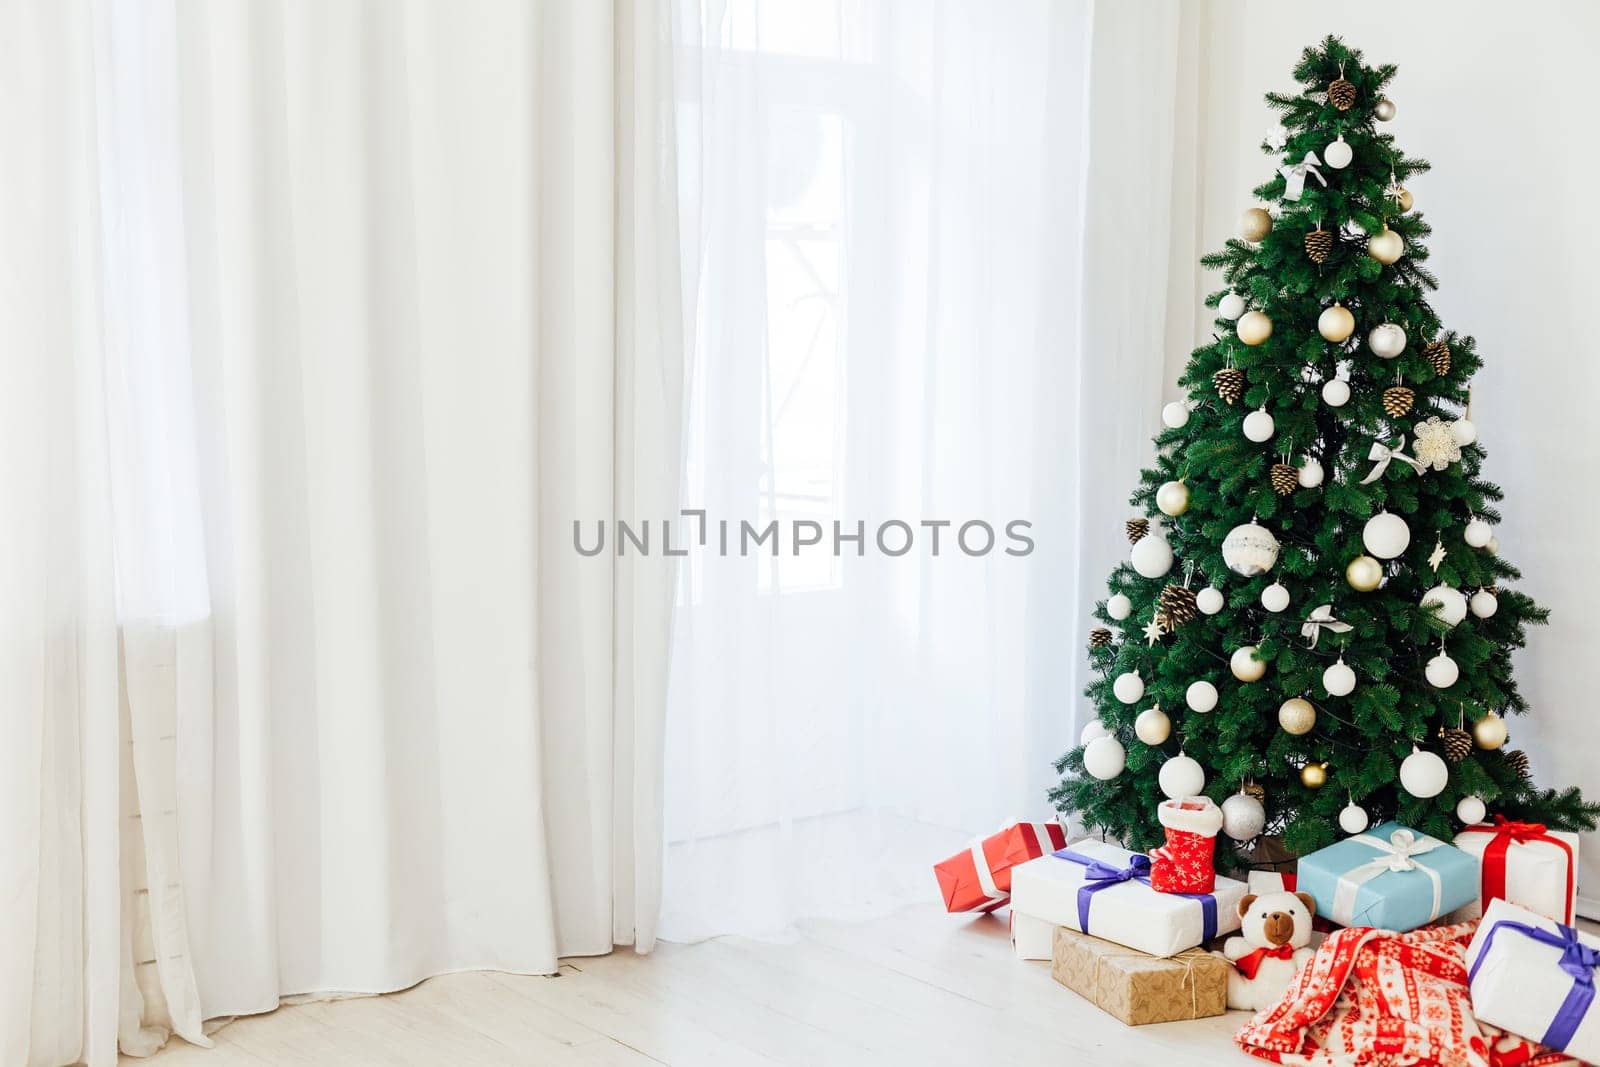 Christmas tree with gifts interior new year decor vintage holiday as background by Simakov